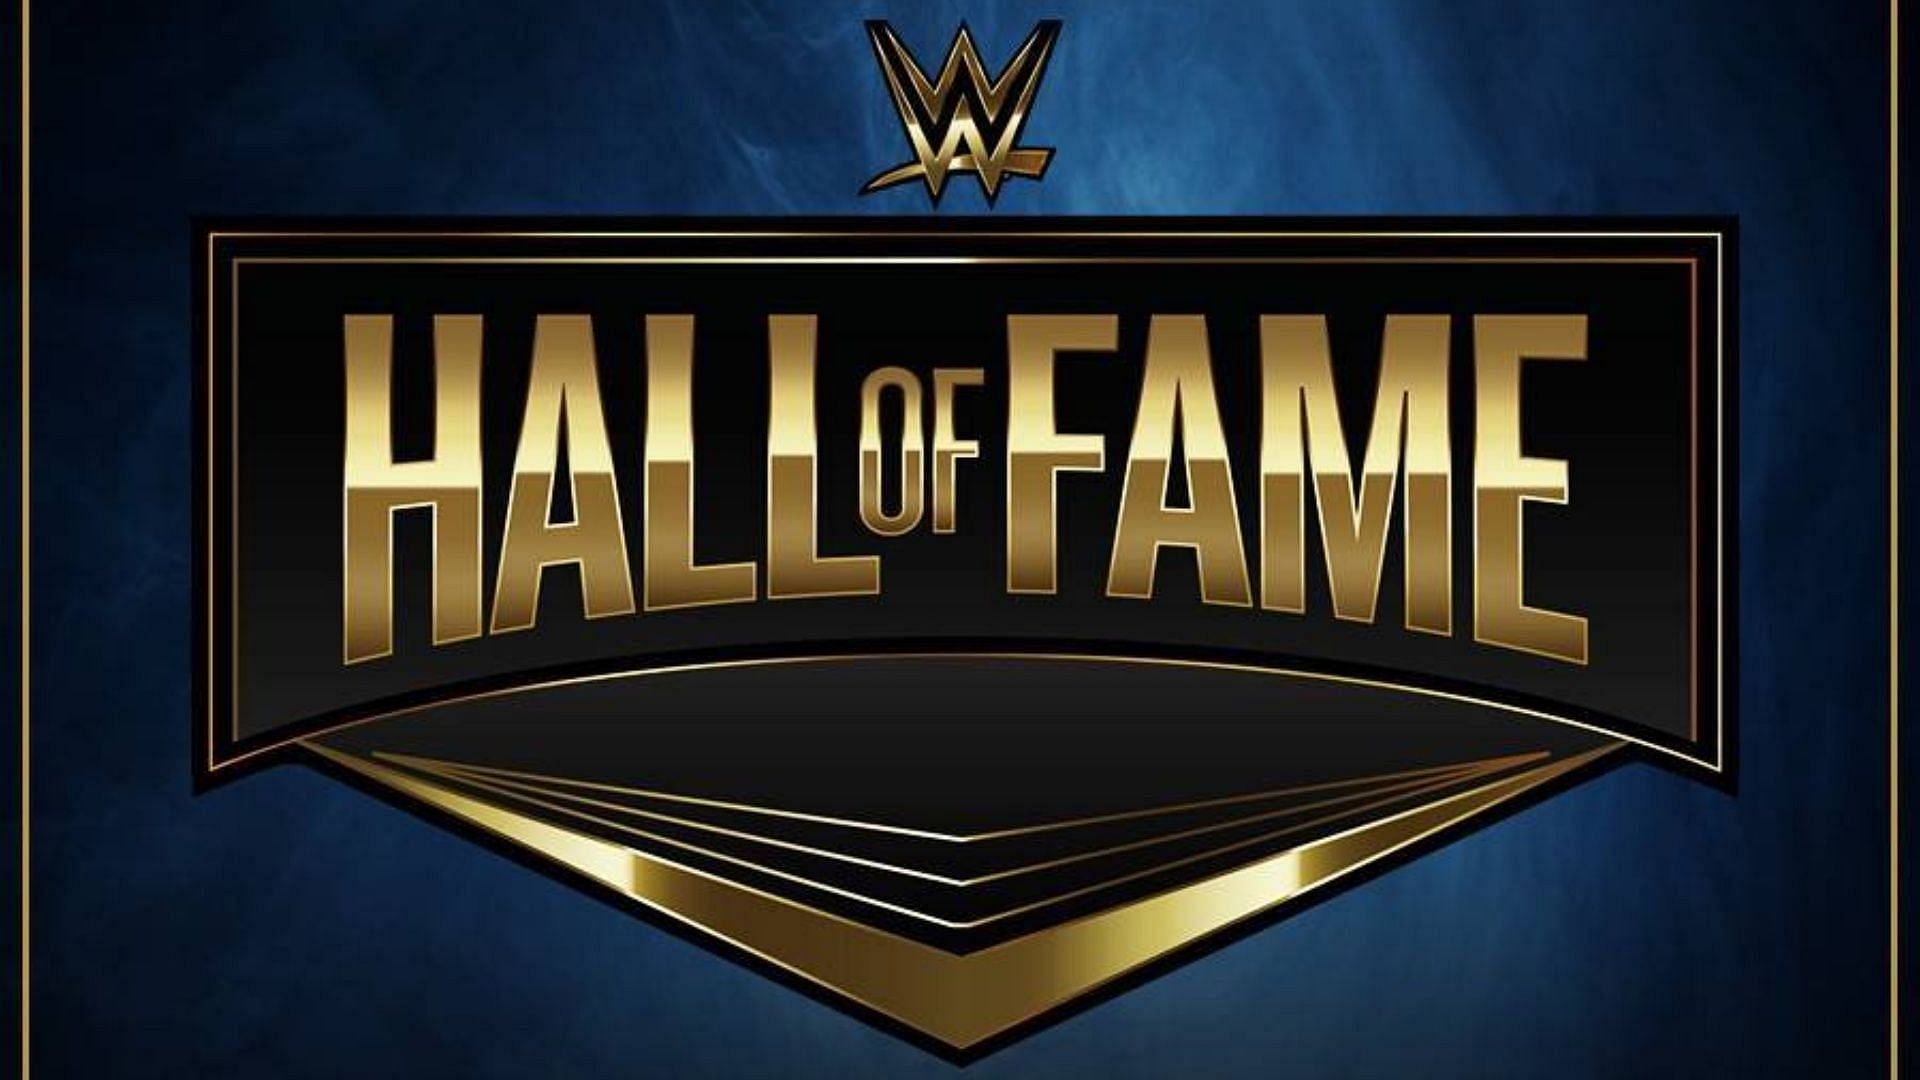 WWE has been using this logo for the Hall of Fame since 2019. 